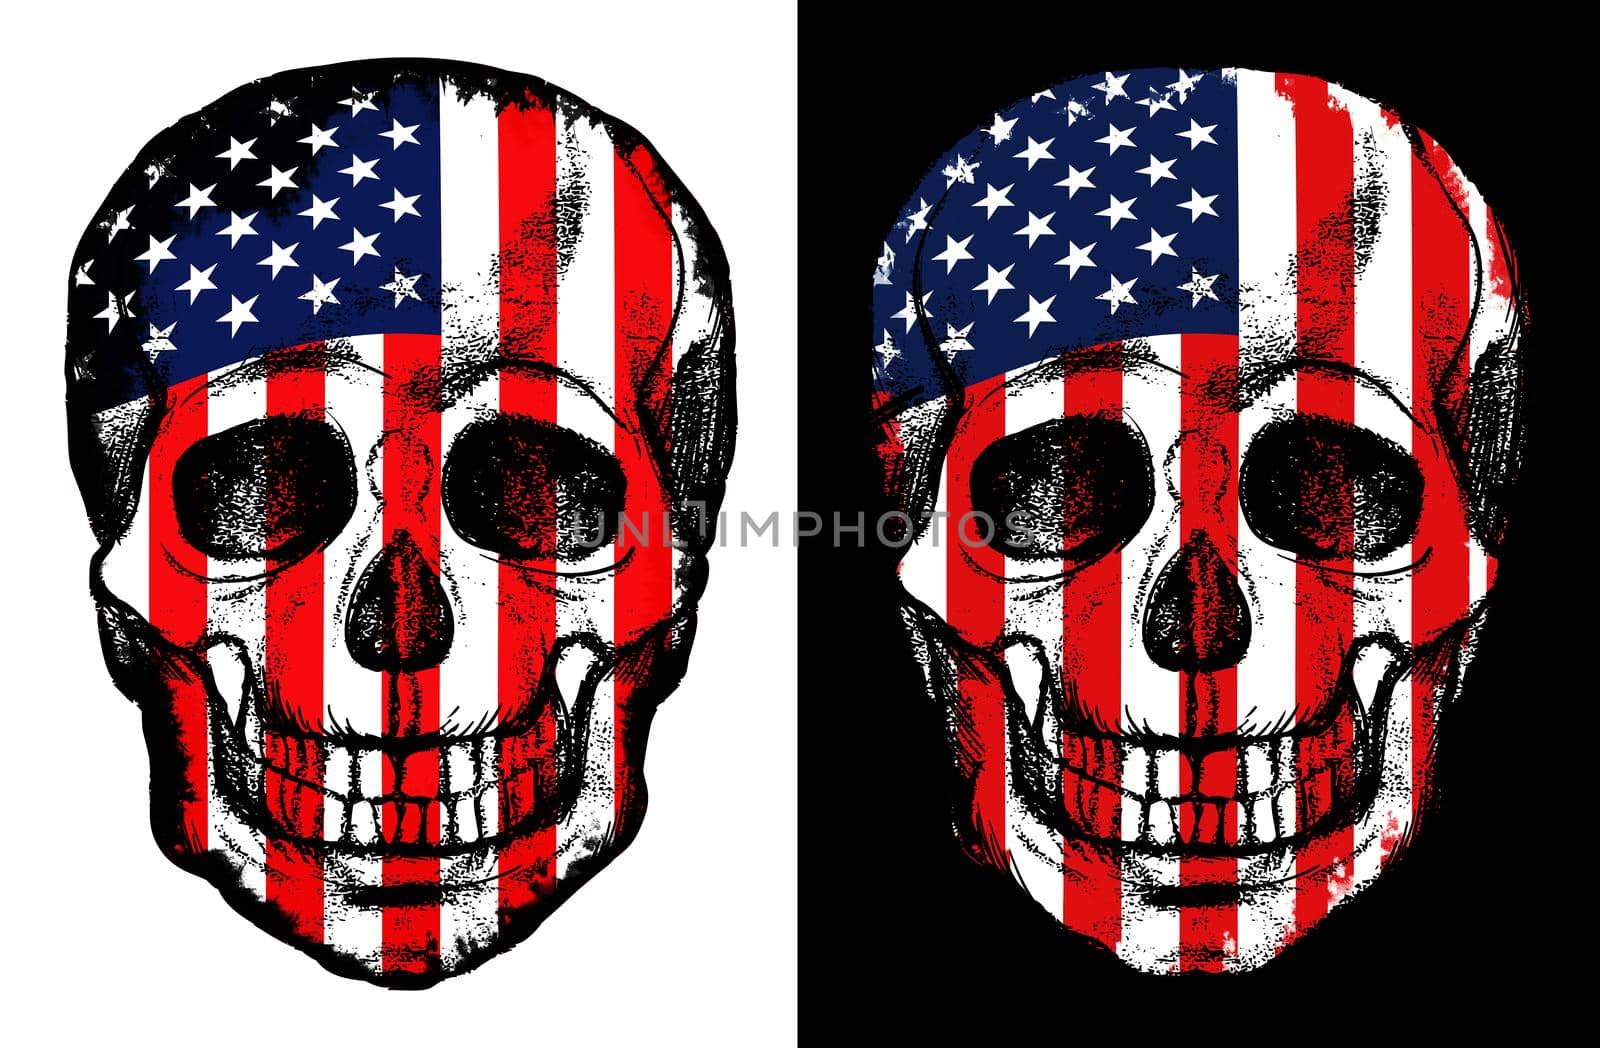 United States Flag Skull illustration on a white and black bacground. With clipping path.